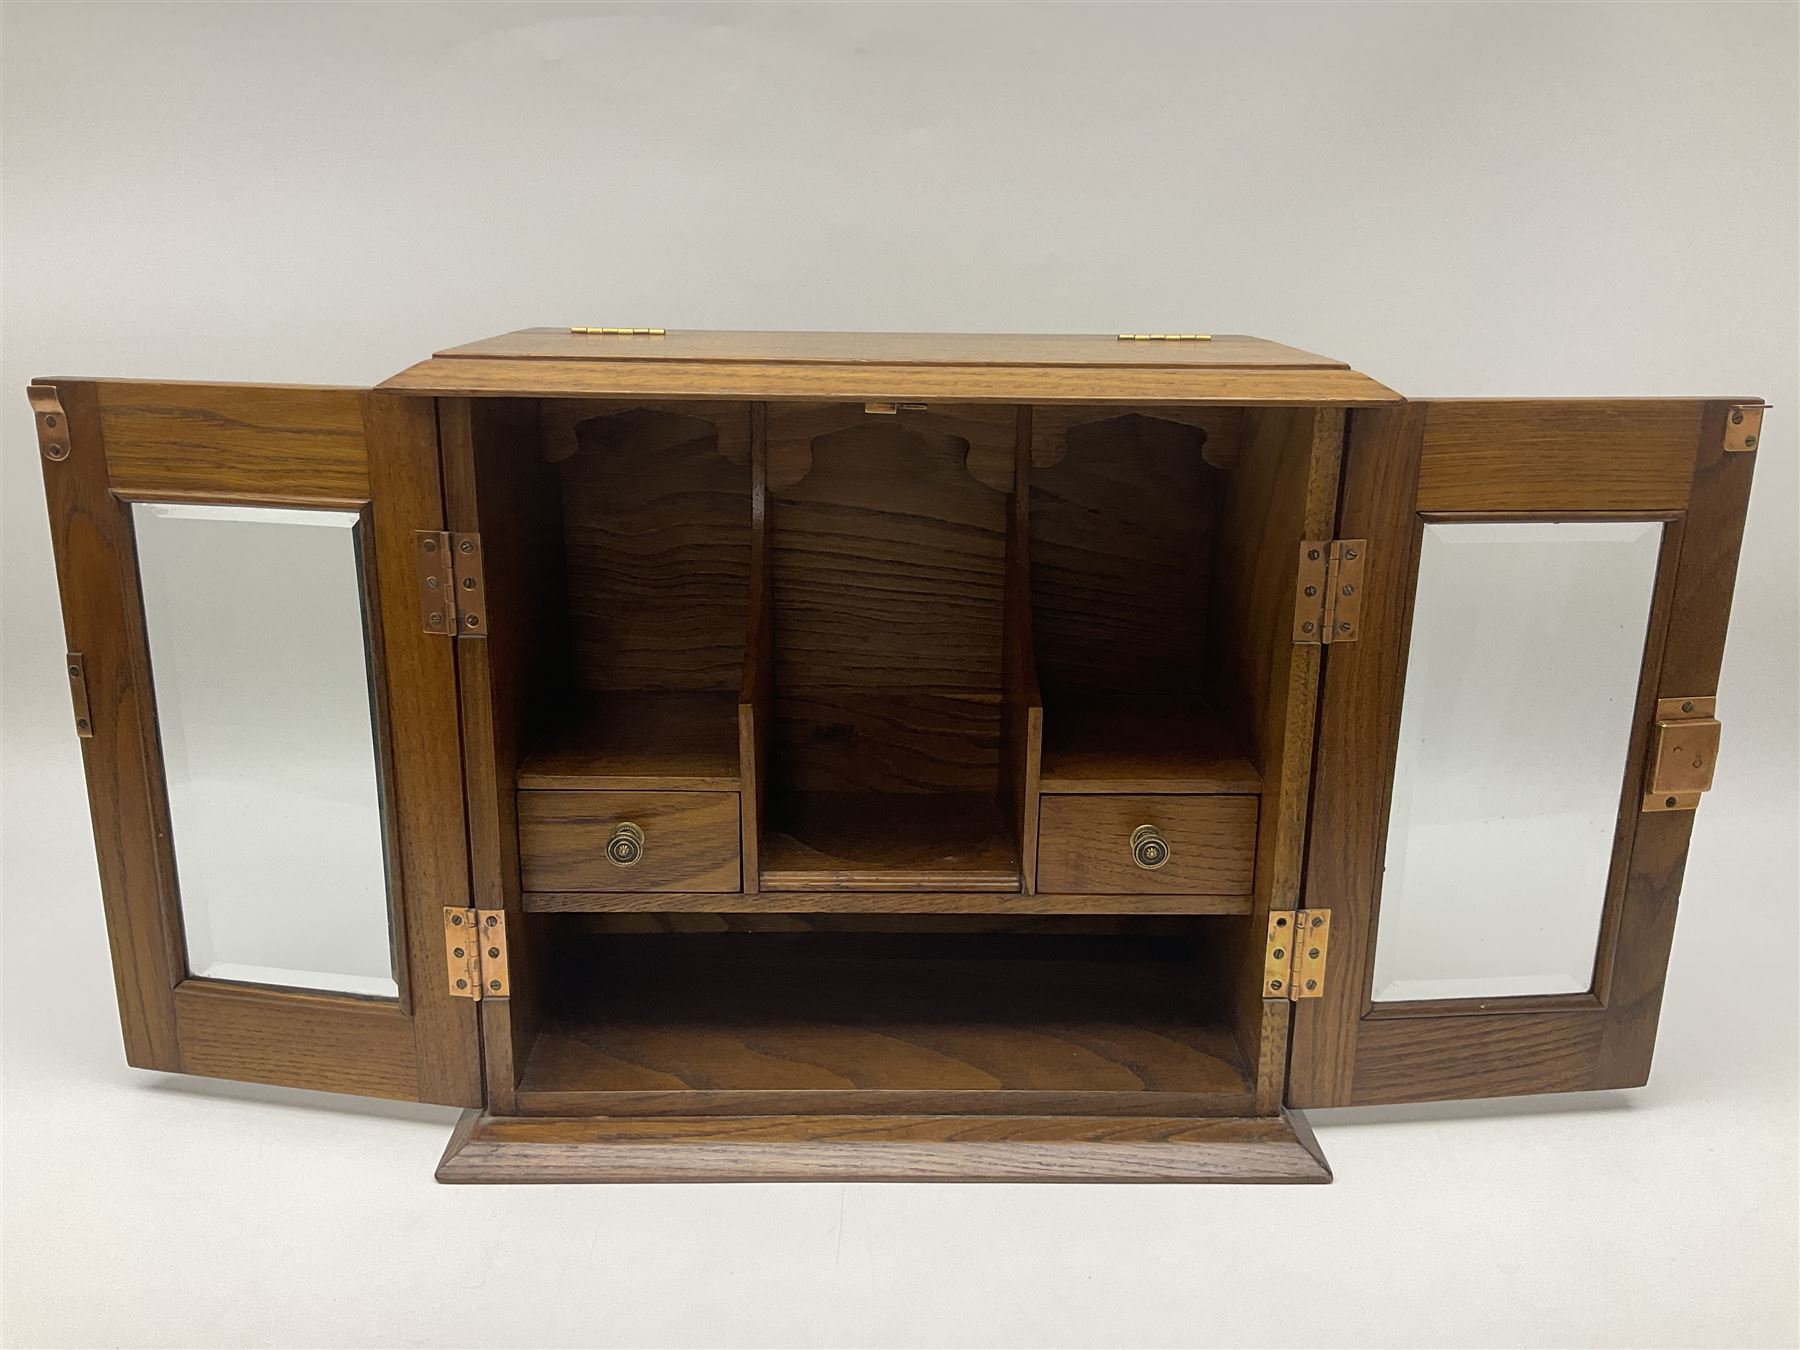 Table top oak smoker's cabinet - Image 3 of 7